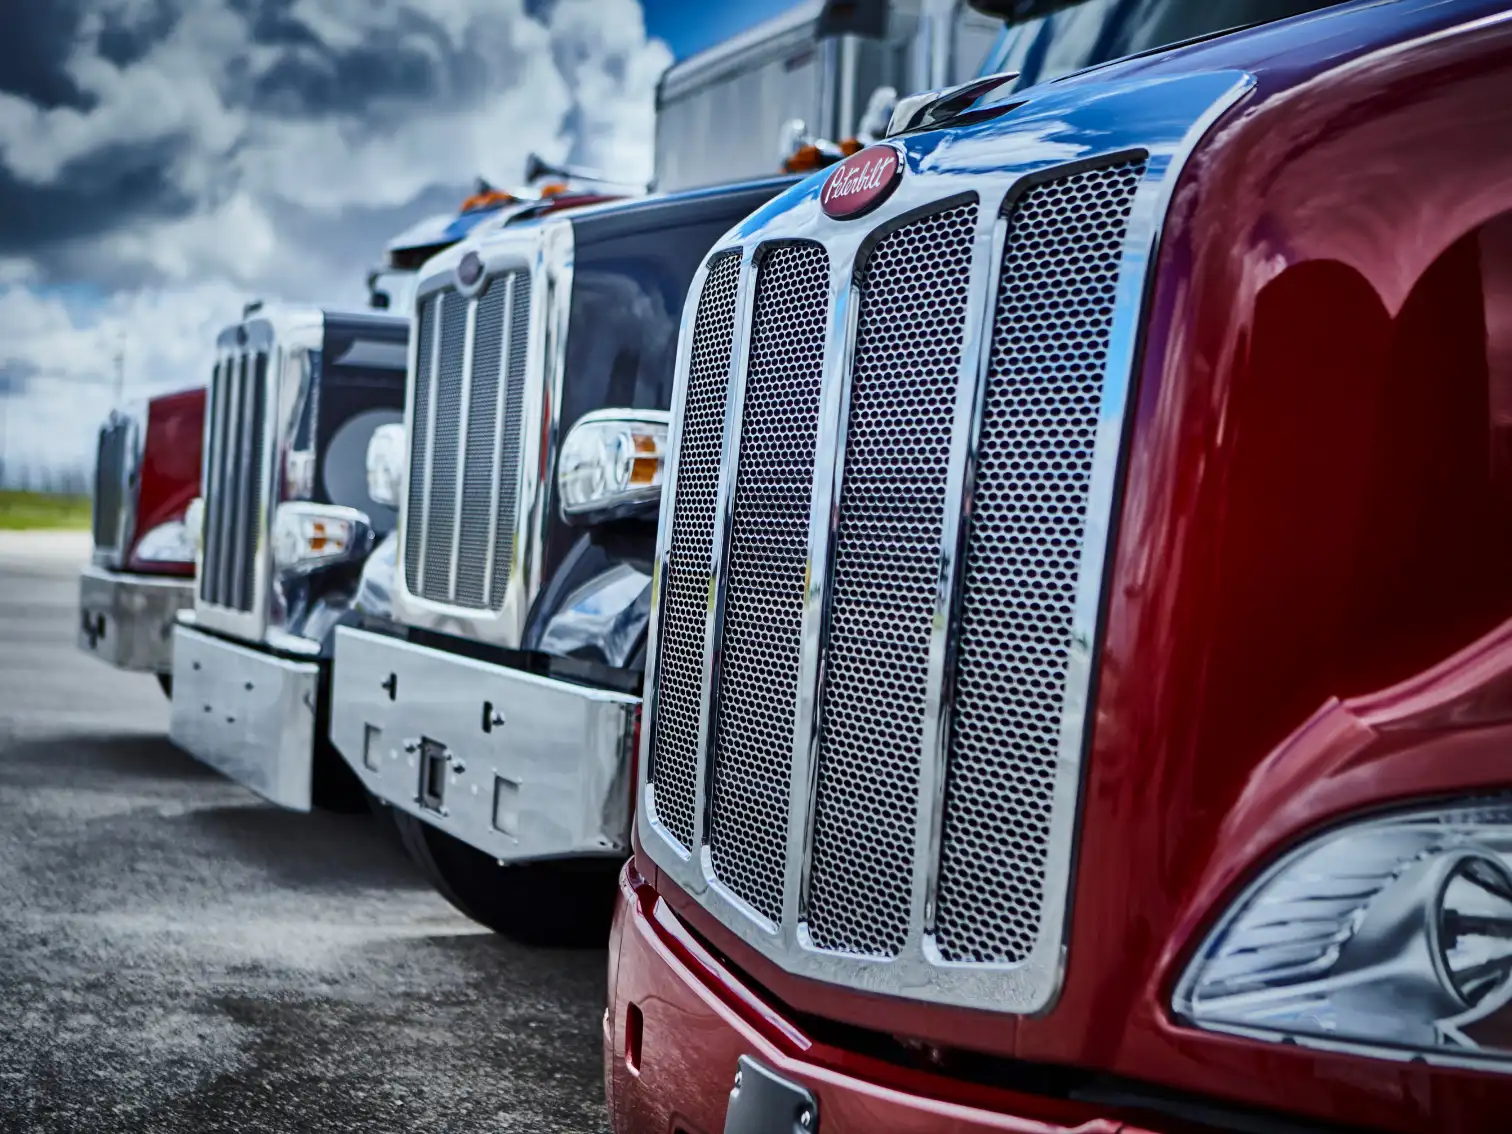 Four iconic Peterbilt grilles lined in formation, set against a moody blue sky